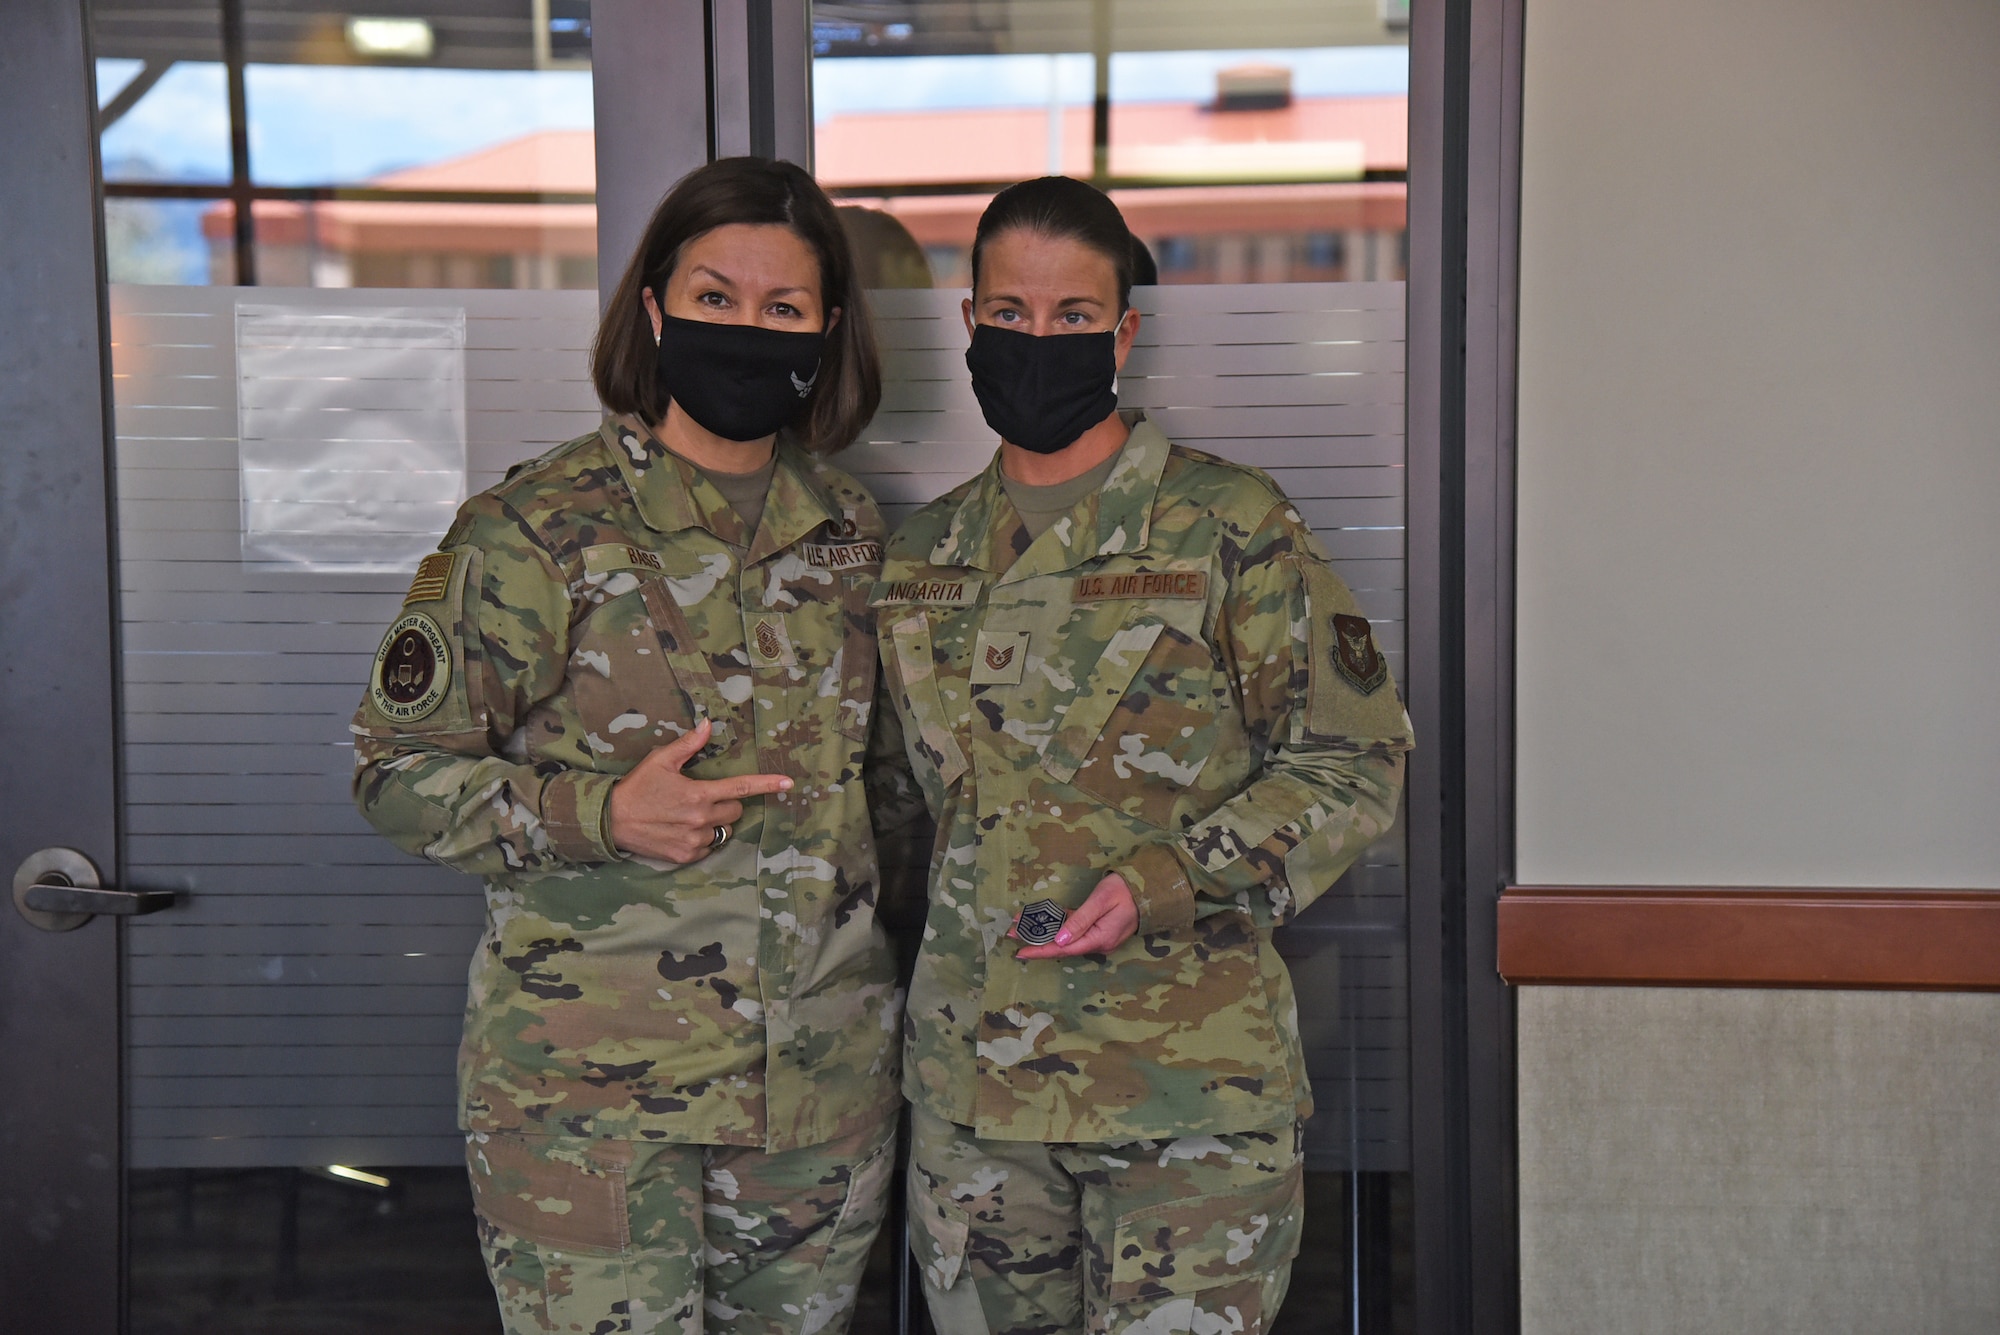 Chief Master Sergeant of the Air Force JoAnne S. Bass coins U.S. Air Force Reserve Tech. Sgt. Donna Angarita, 302nd Logistics Readiness Squadron, during her lunch with junior noncommissioned officers at Peterson Air Force Base, Colorado, May 5, 2021.